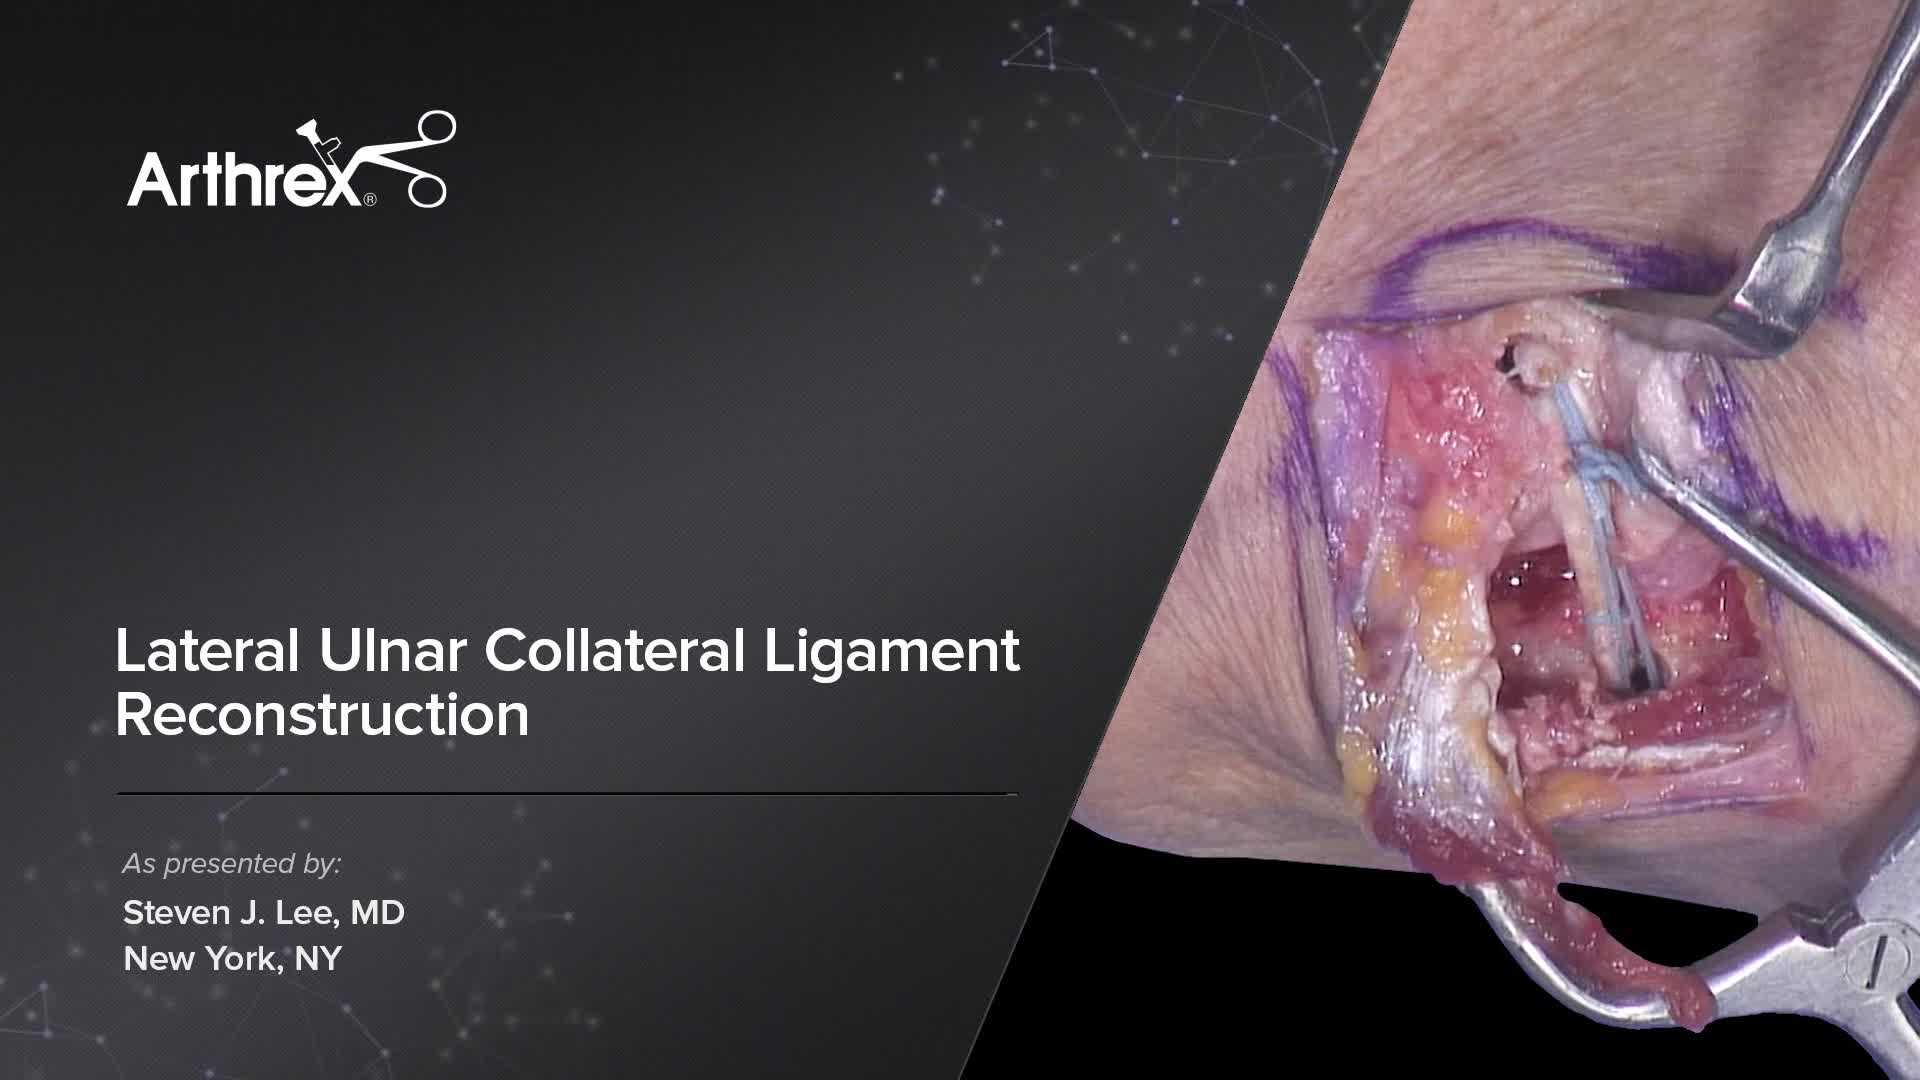 Arthrex Lateral Ulnar Collateral Ligament Reconstruction